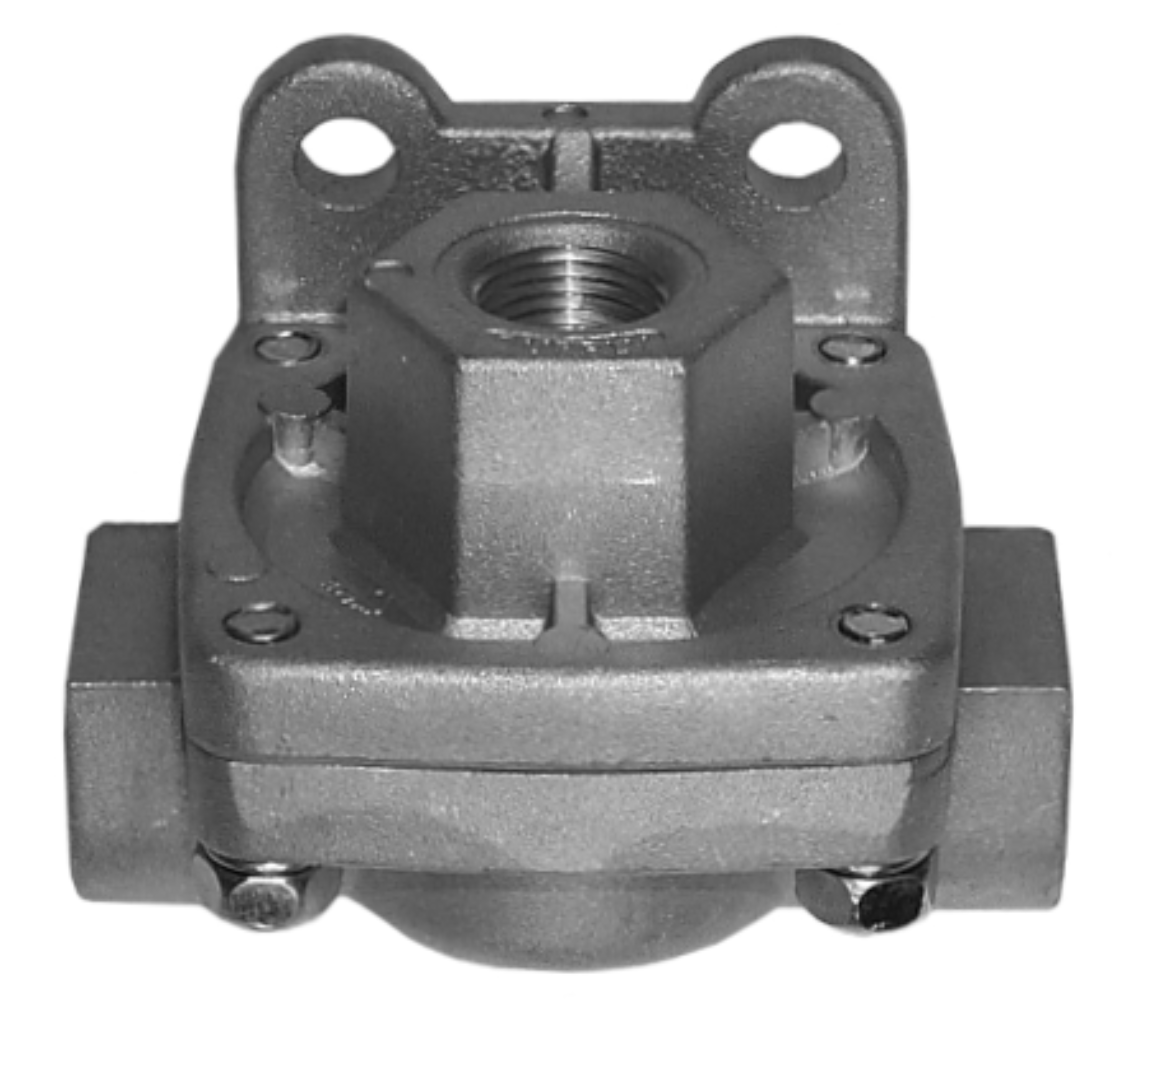 Picture of QUICK RELEASE VALVE  QR1 STYLE 3/8" Supply, 1/4" Delivery, 1 PSI Crack Pressure
(Replaces 229813)